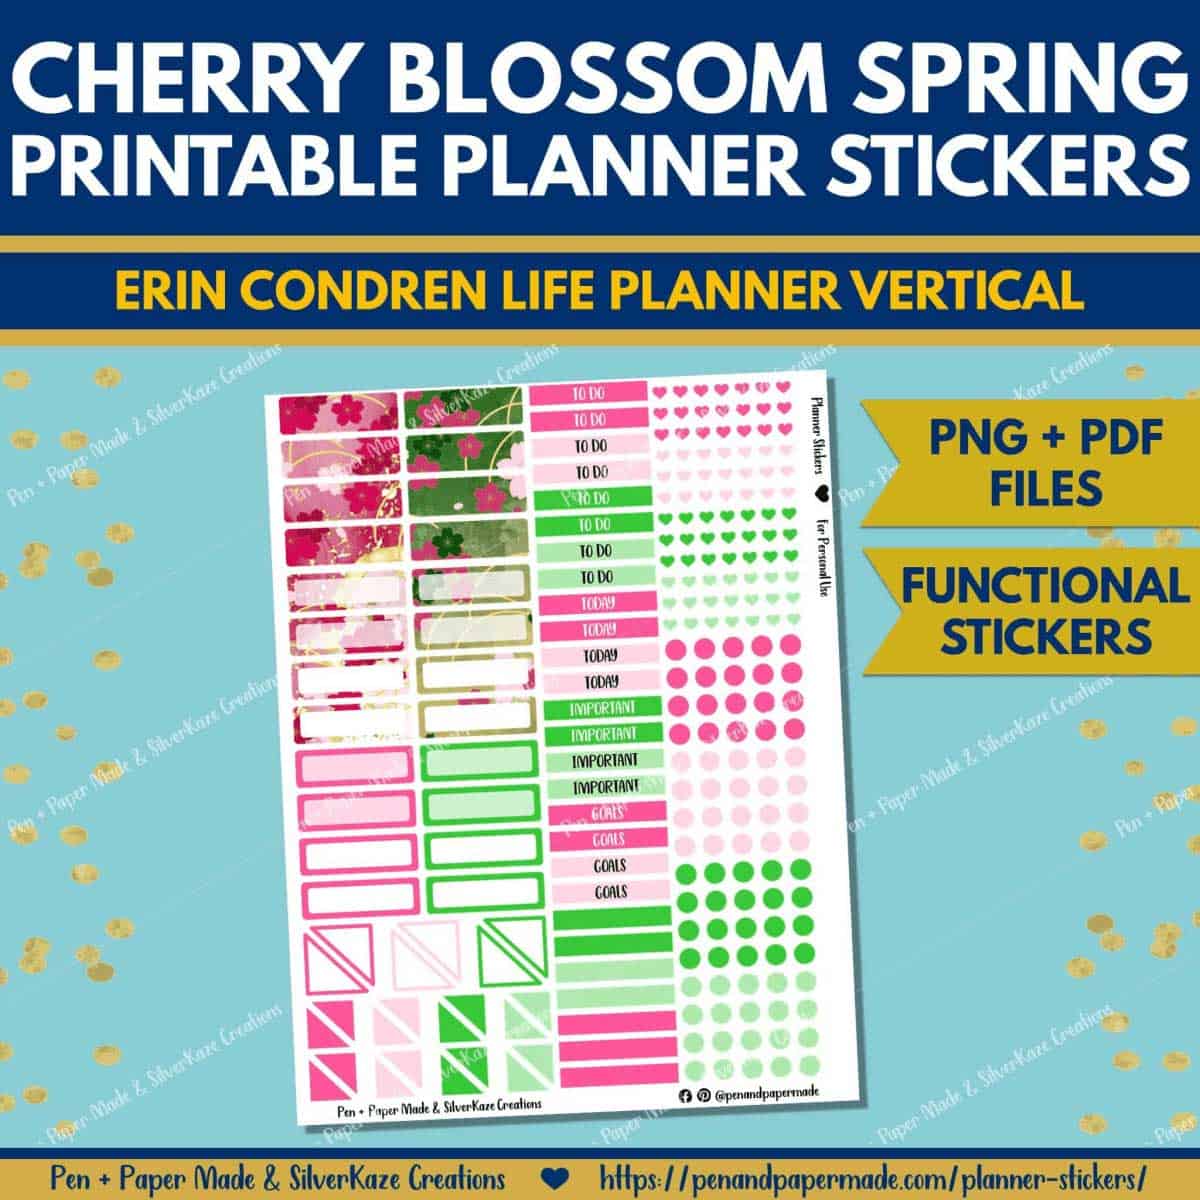 spring cherry blossom in pink, green functional sticker labels.